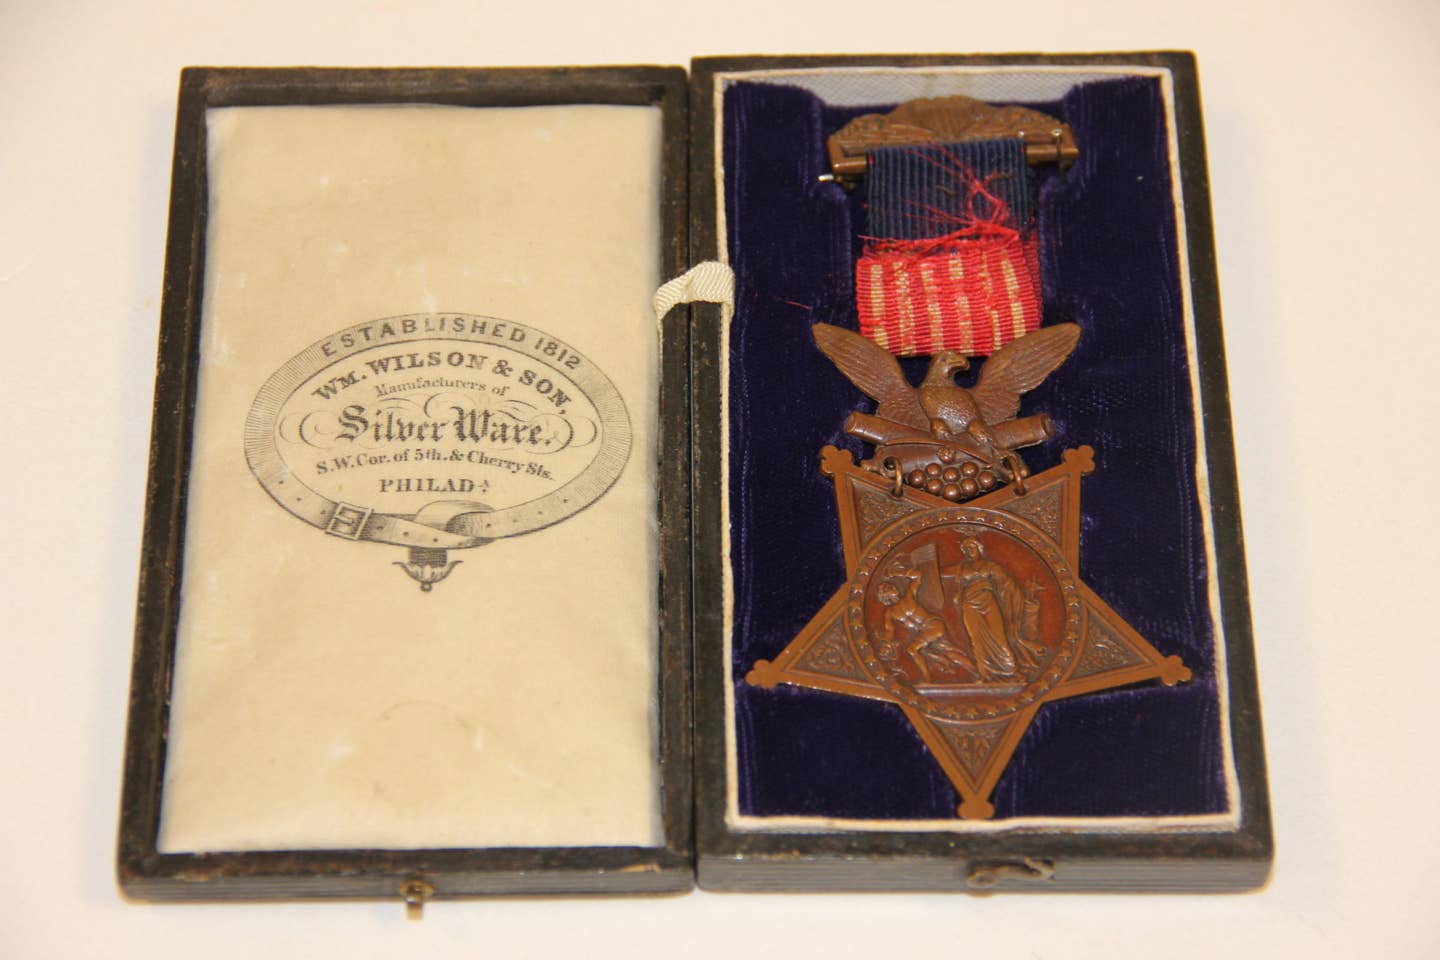 Above, an original design of the Medal of Honor.